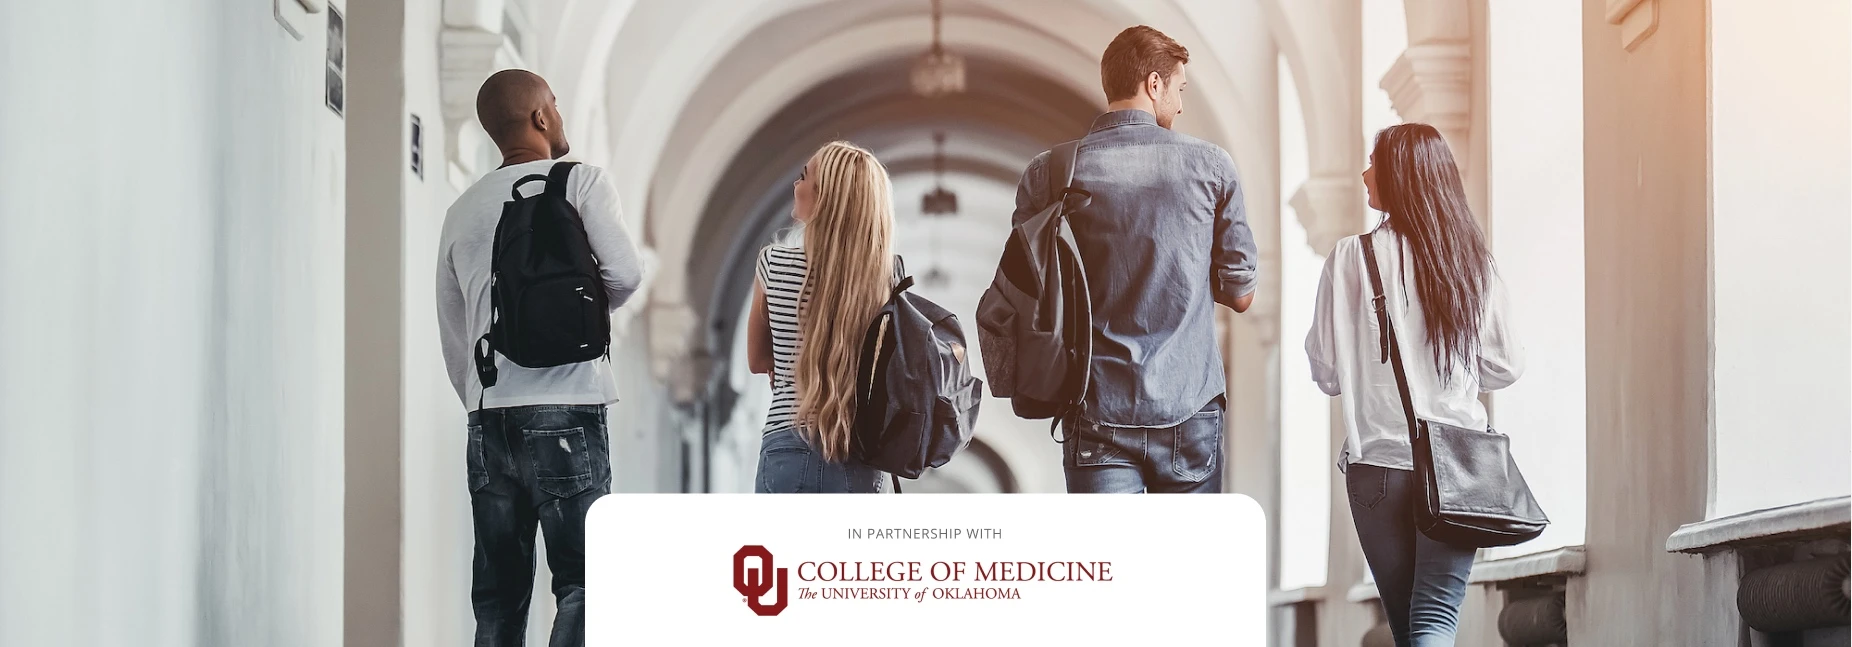 In partnership with The University of Oklahoma College of Medicine